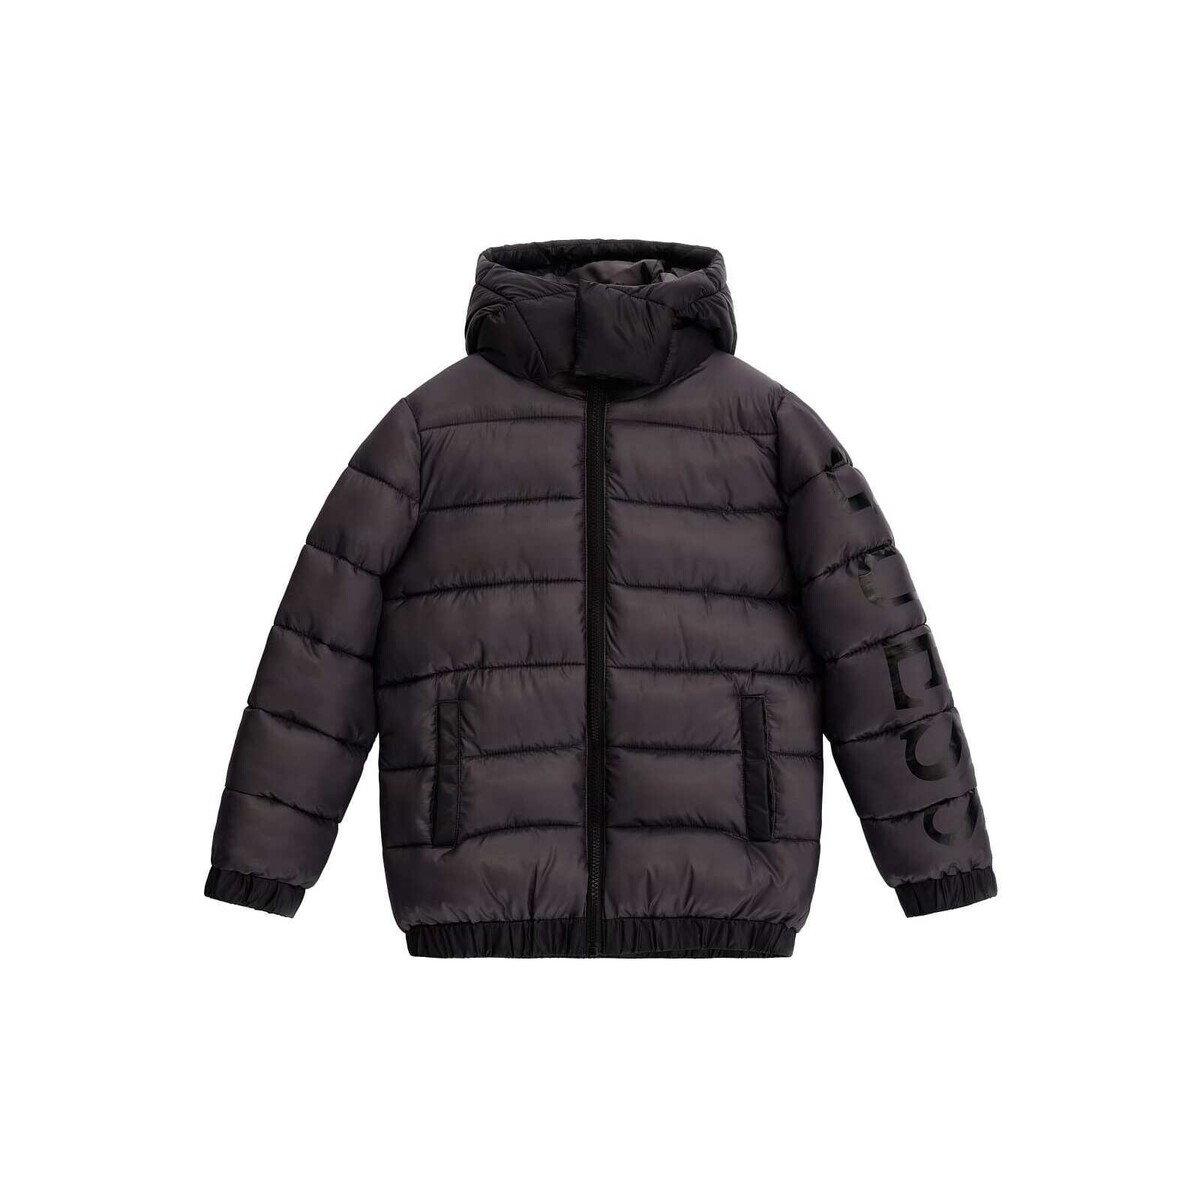 Spartoo | Free delivery Grey coats ! L3BL10 Clothing - Child Duffel - Guess NET